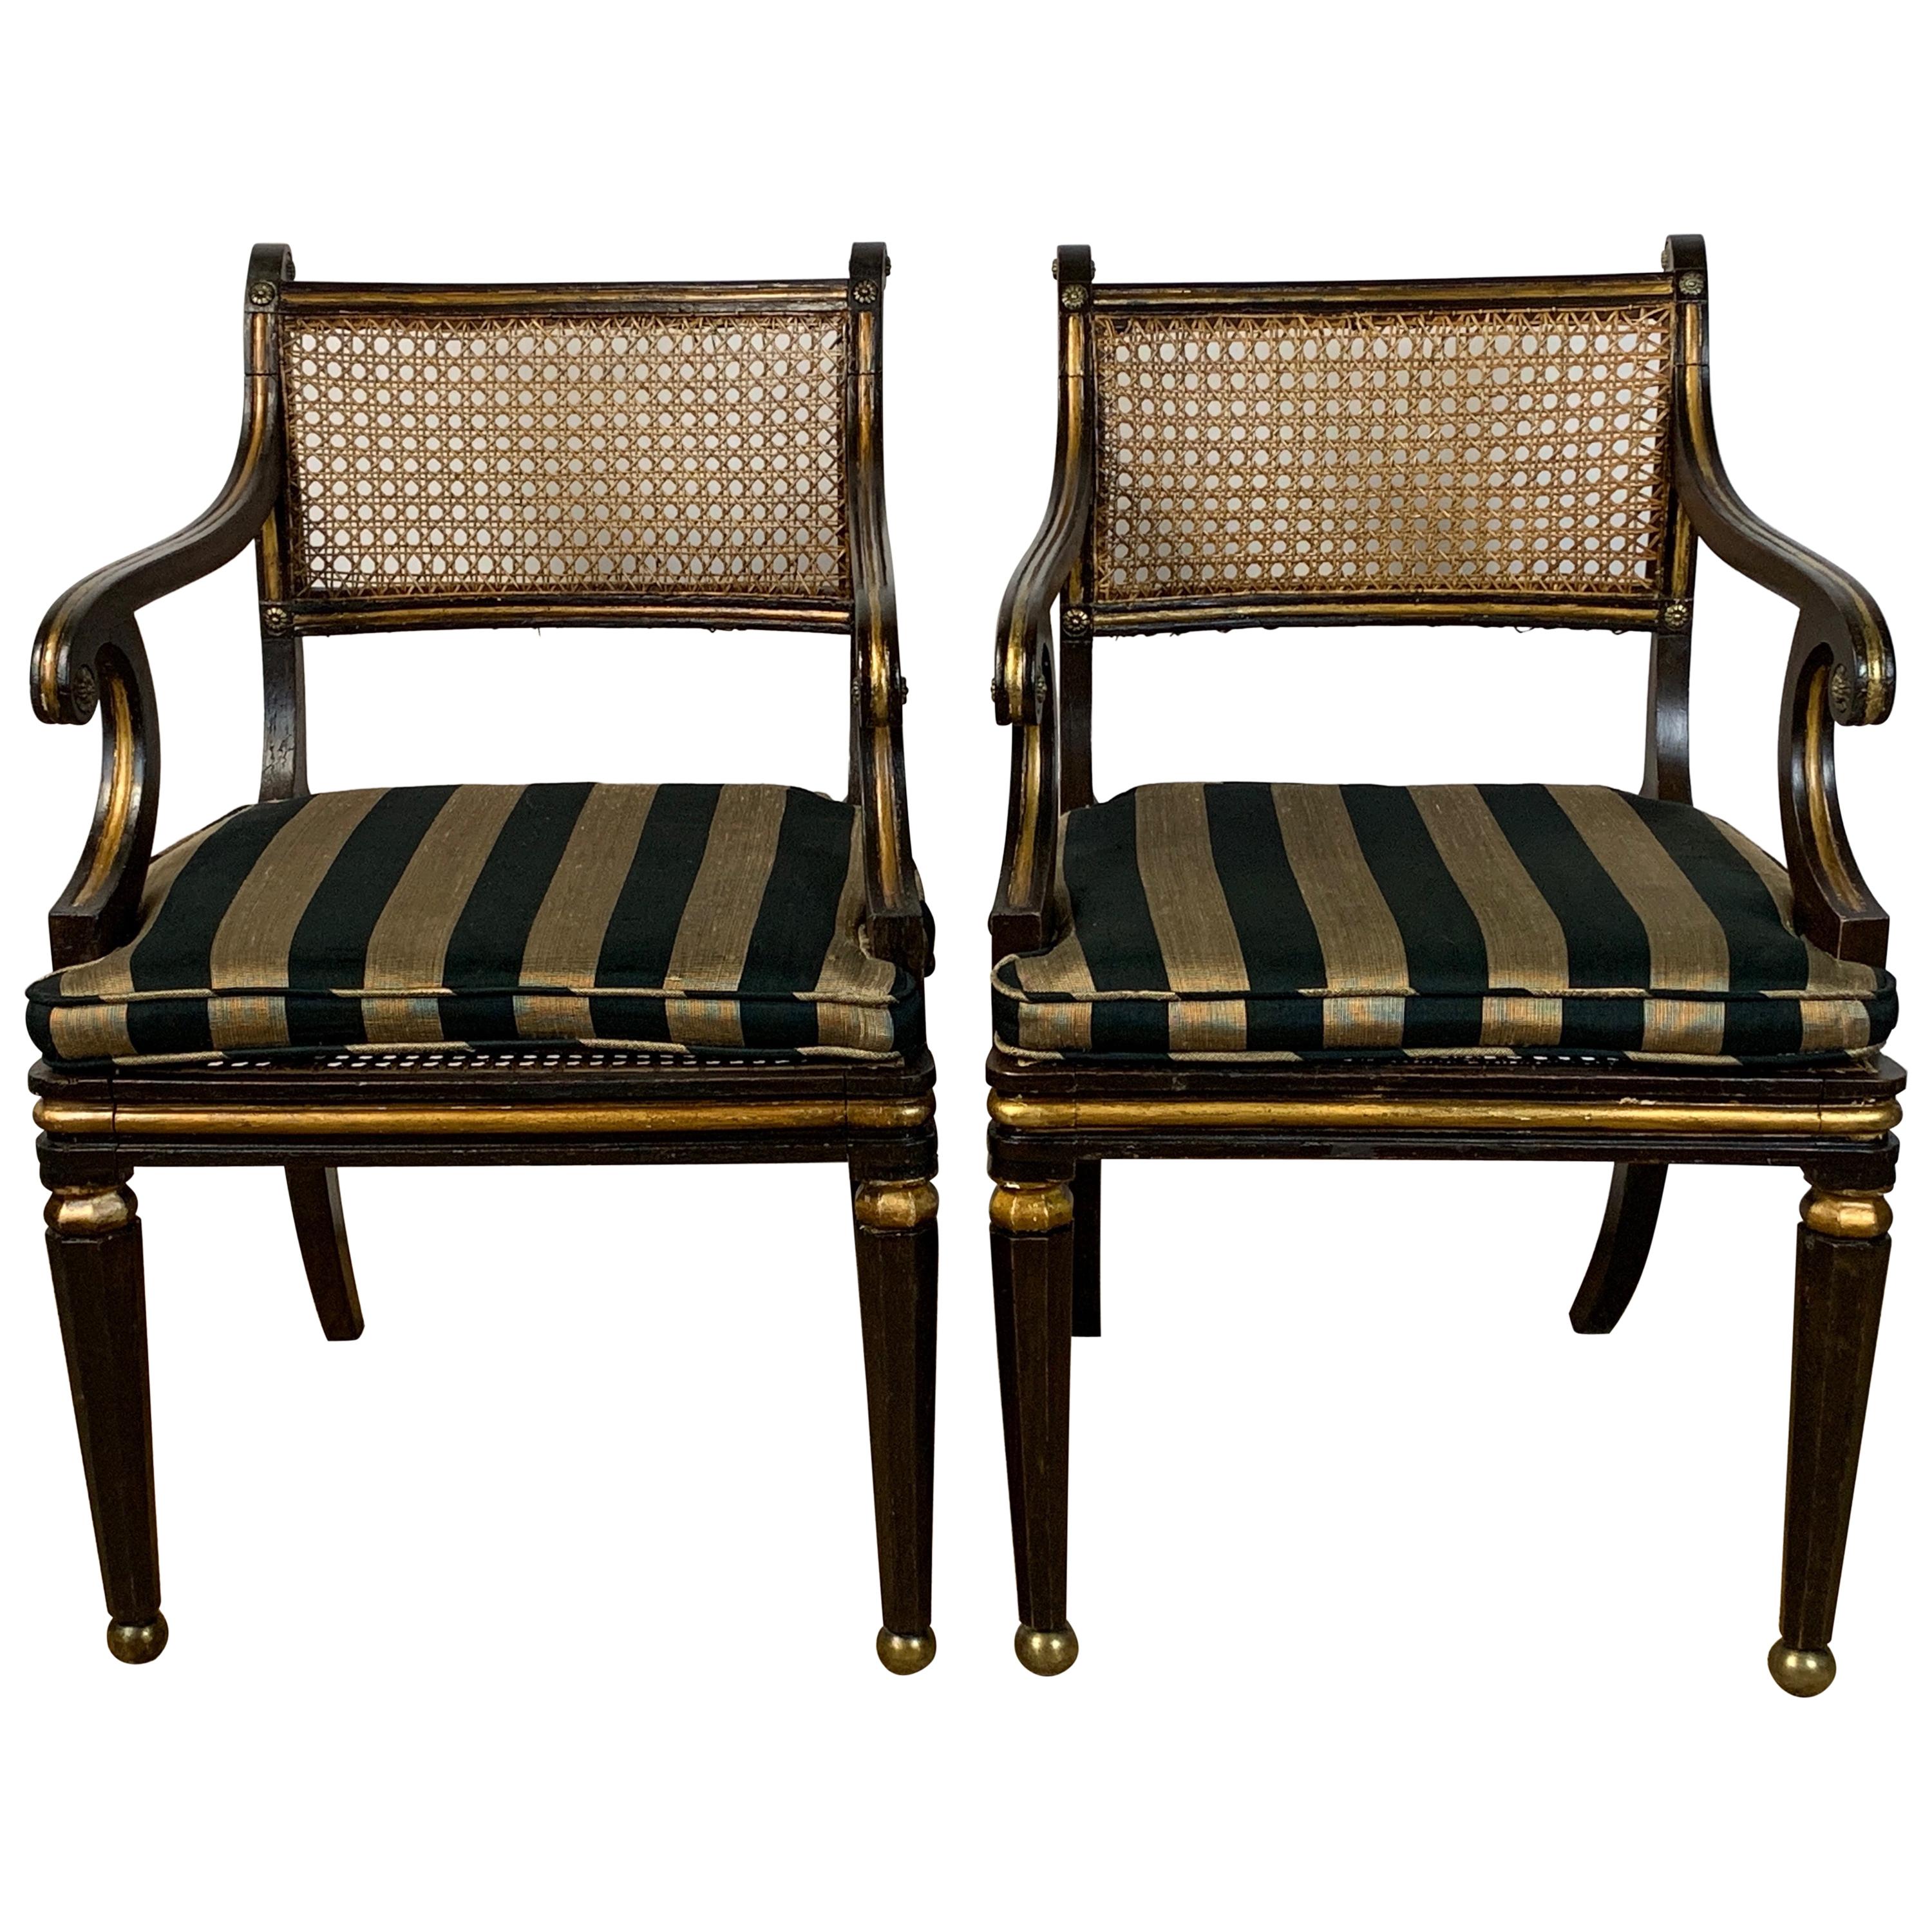 Pair of English Regency Ebonized and Gilded Armchairs